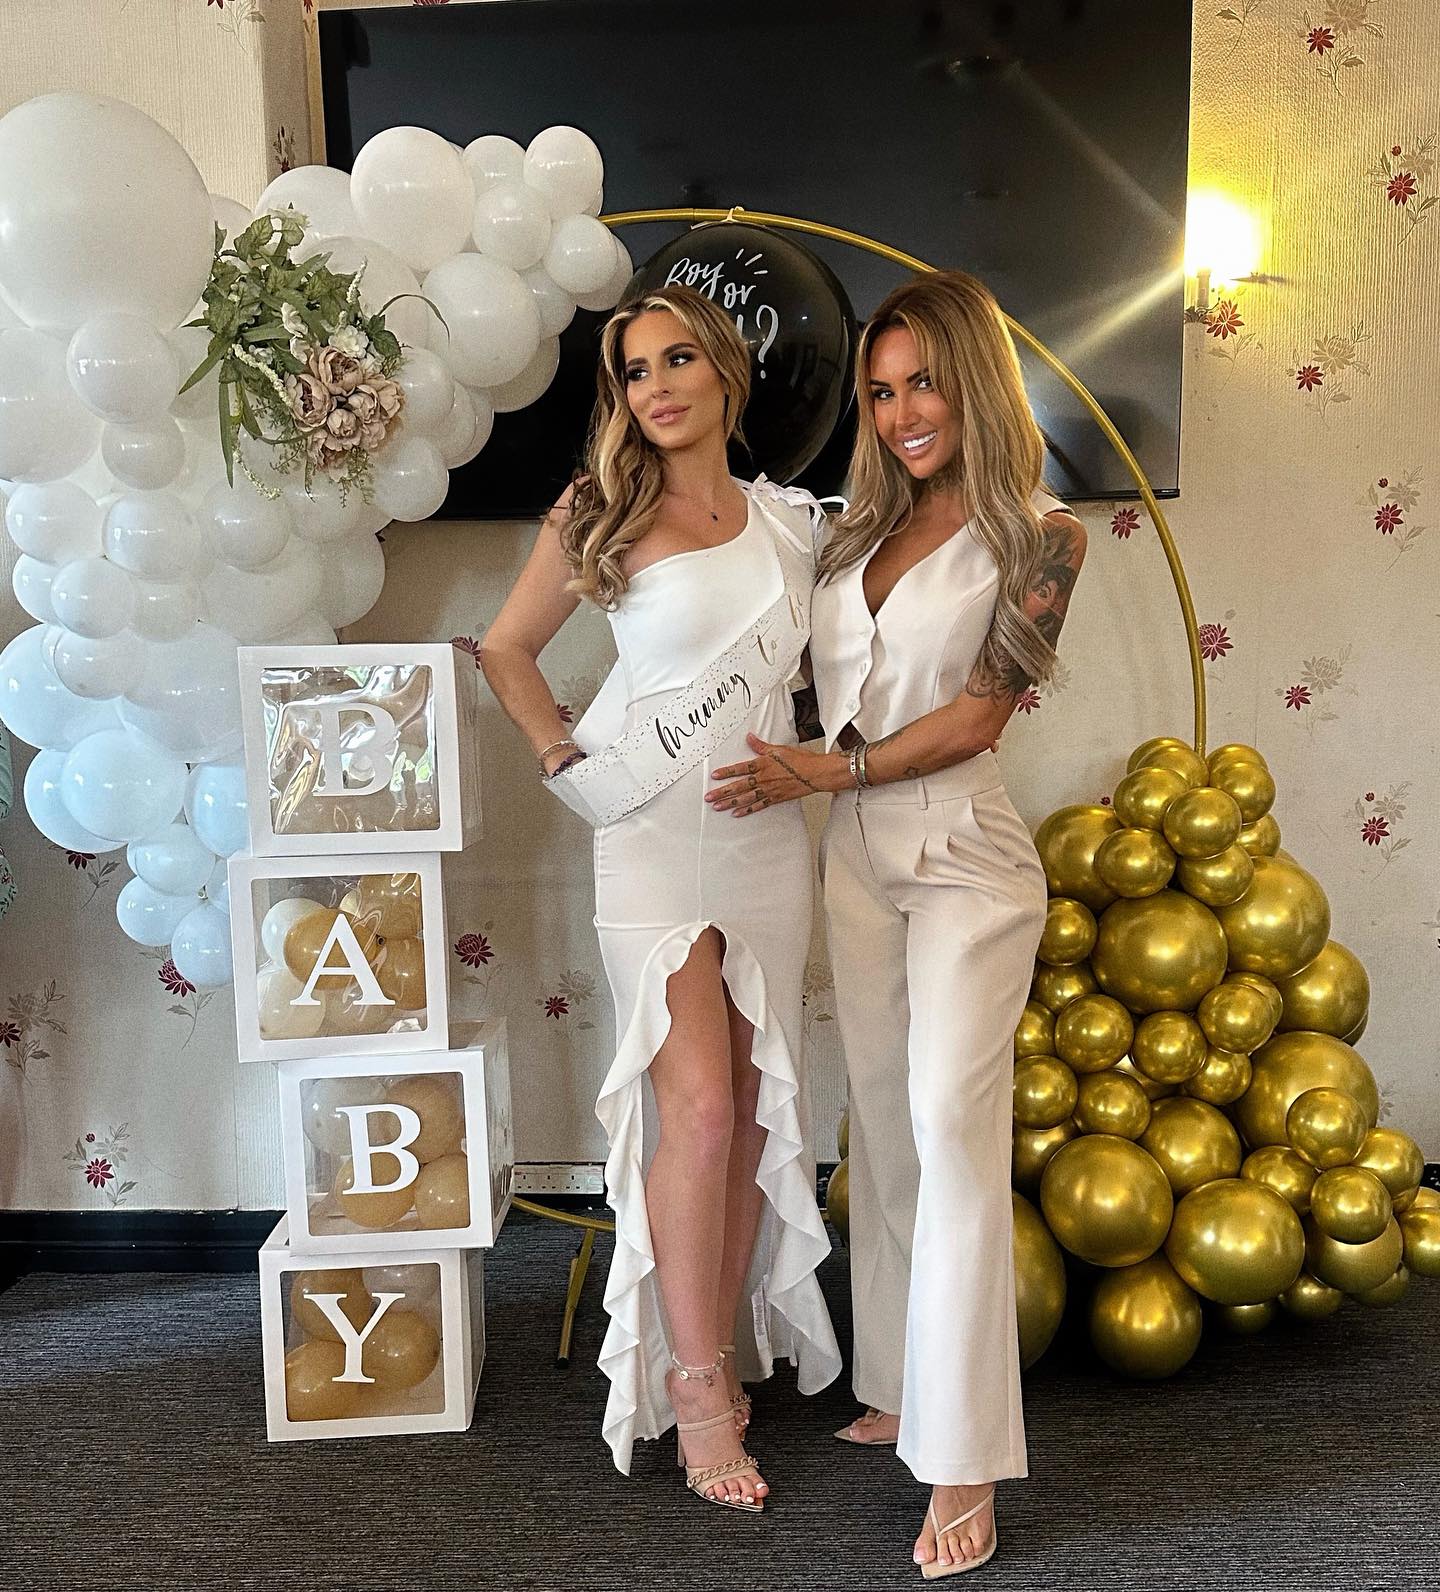 Happy international Women’s day 🌹Throwback to my Gender Reveal Party! One of my most precious special days of my life finding out I’ll be raising a strong beautiful little princess, my biggest bundle of joy🎁 

Thank you for giving me the biggest purpose in my life choosing me to become your Mammy! 

I can’t wait to travel the world with you & give you all the love you need and deserve! You fill my heart with so much love, I’ve lost count at how many happy tears I’ve cried over you I feel so lucky and grateful you have changed my life so much already ❤️

I love this video of my family & Closest friends  reactions so cute leaving the camera running priceless moments to share in the future with my little girl.. You and me forever

Ps thank you @momentsbymelissa23 @themelissapoppy for my amazing balloons & decorations you smashed it girl!! @liammalvern for the amazing Pizzas from the restaurant & my family & friends for all the help, gifts, love & support we are forever grateful yous are always spoiling us 💋